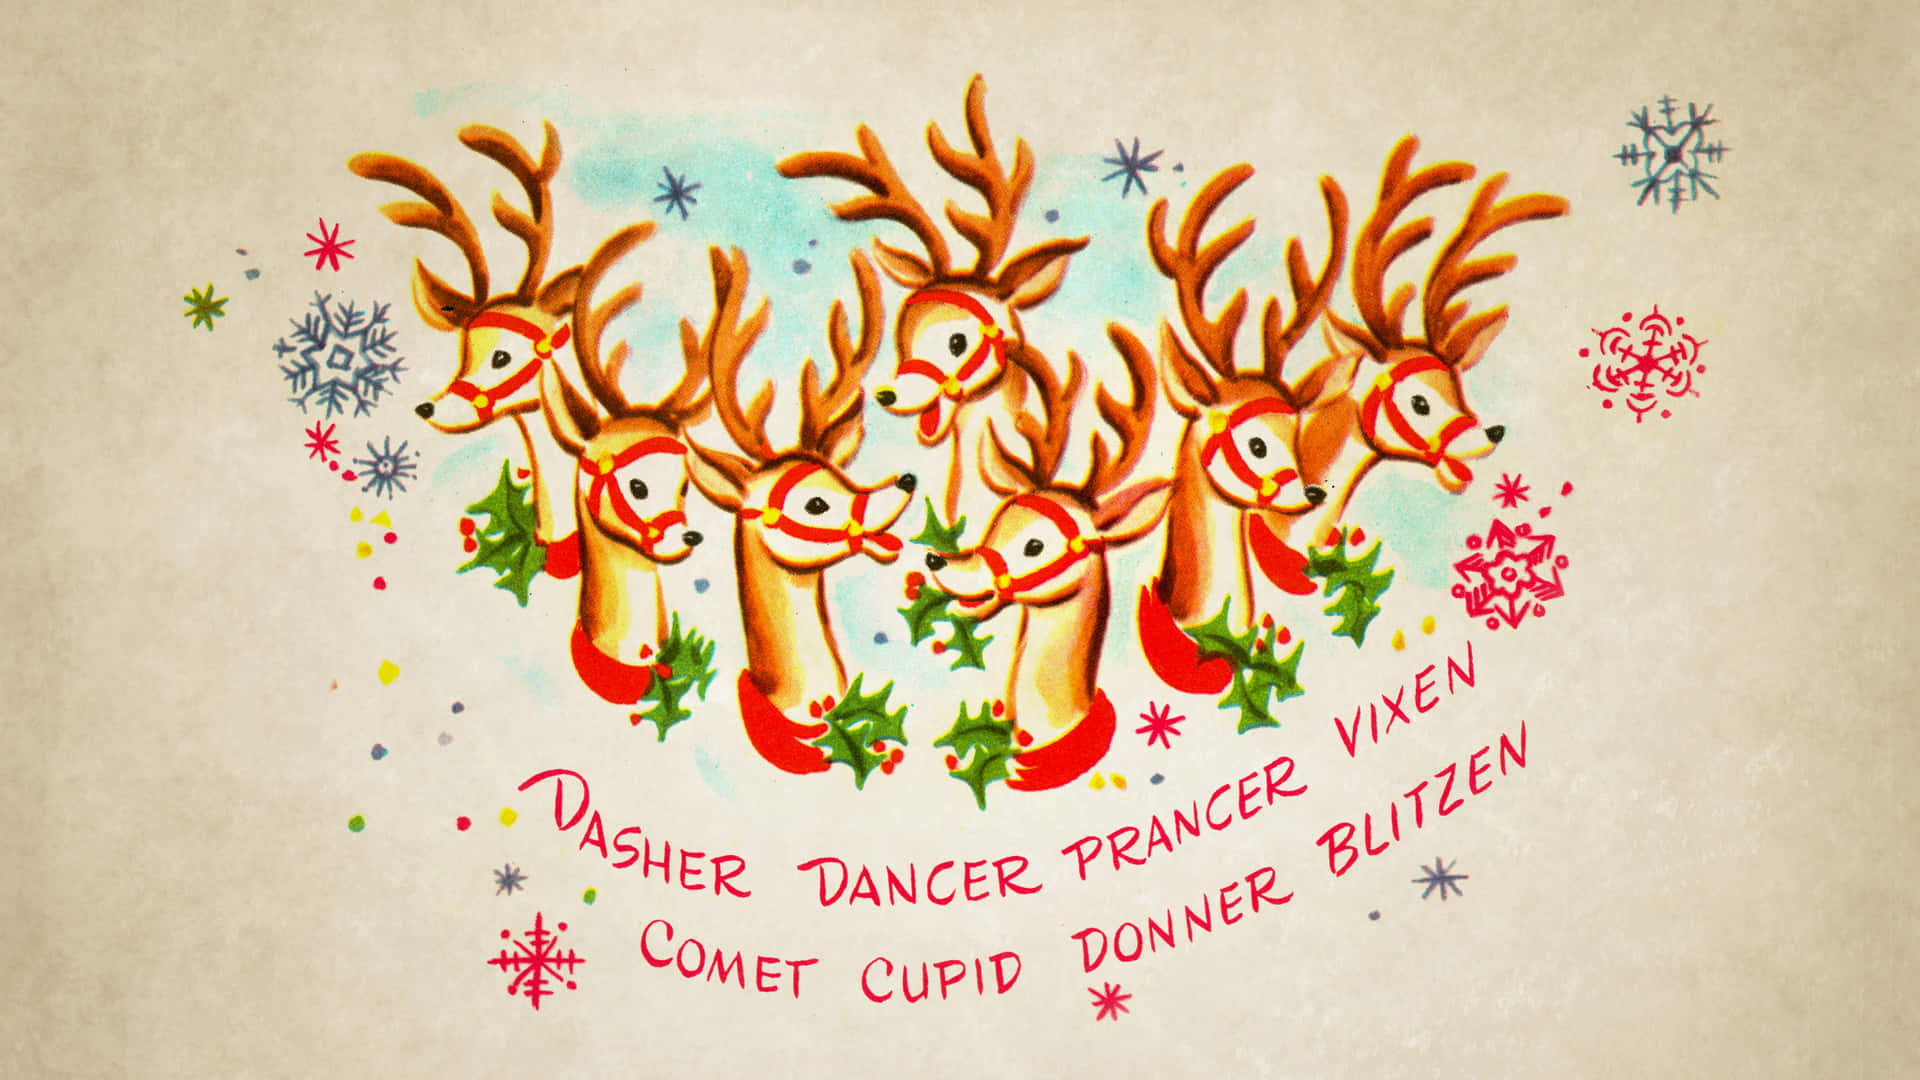 Festive Vintage Christmas Background with Ornaments and Snowflakes